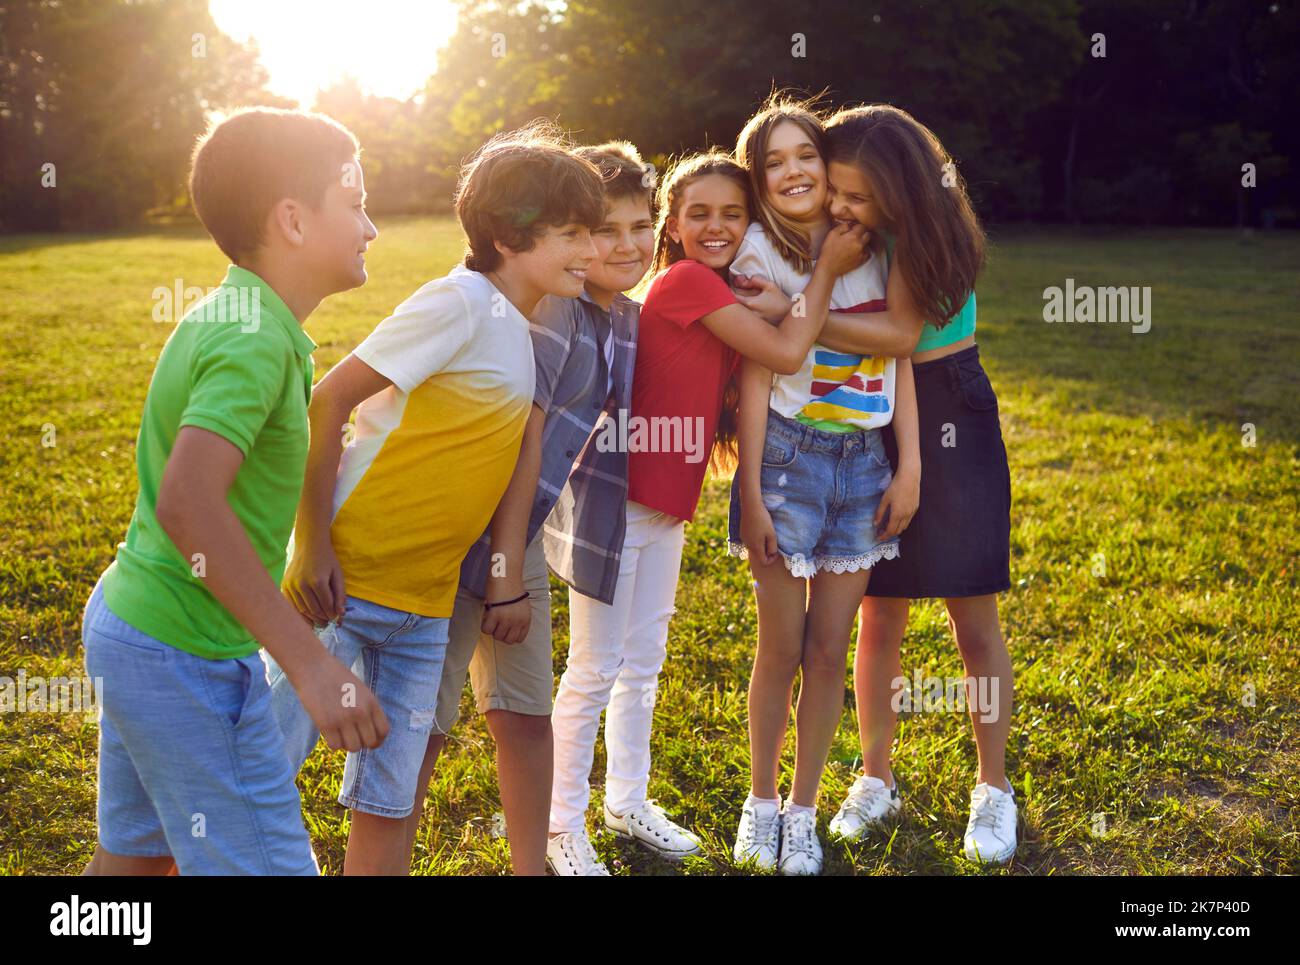 Friendly funny teen boys and girls in summer park have good time outdoors together with peers Stock Photo